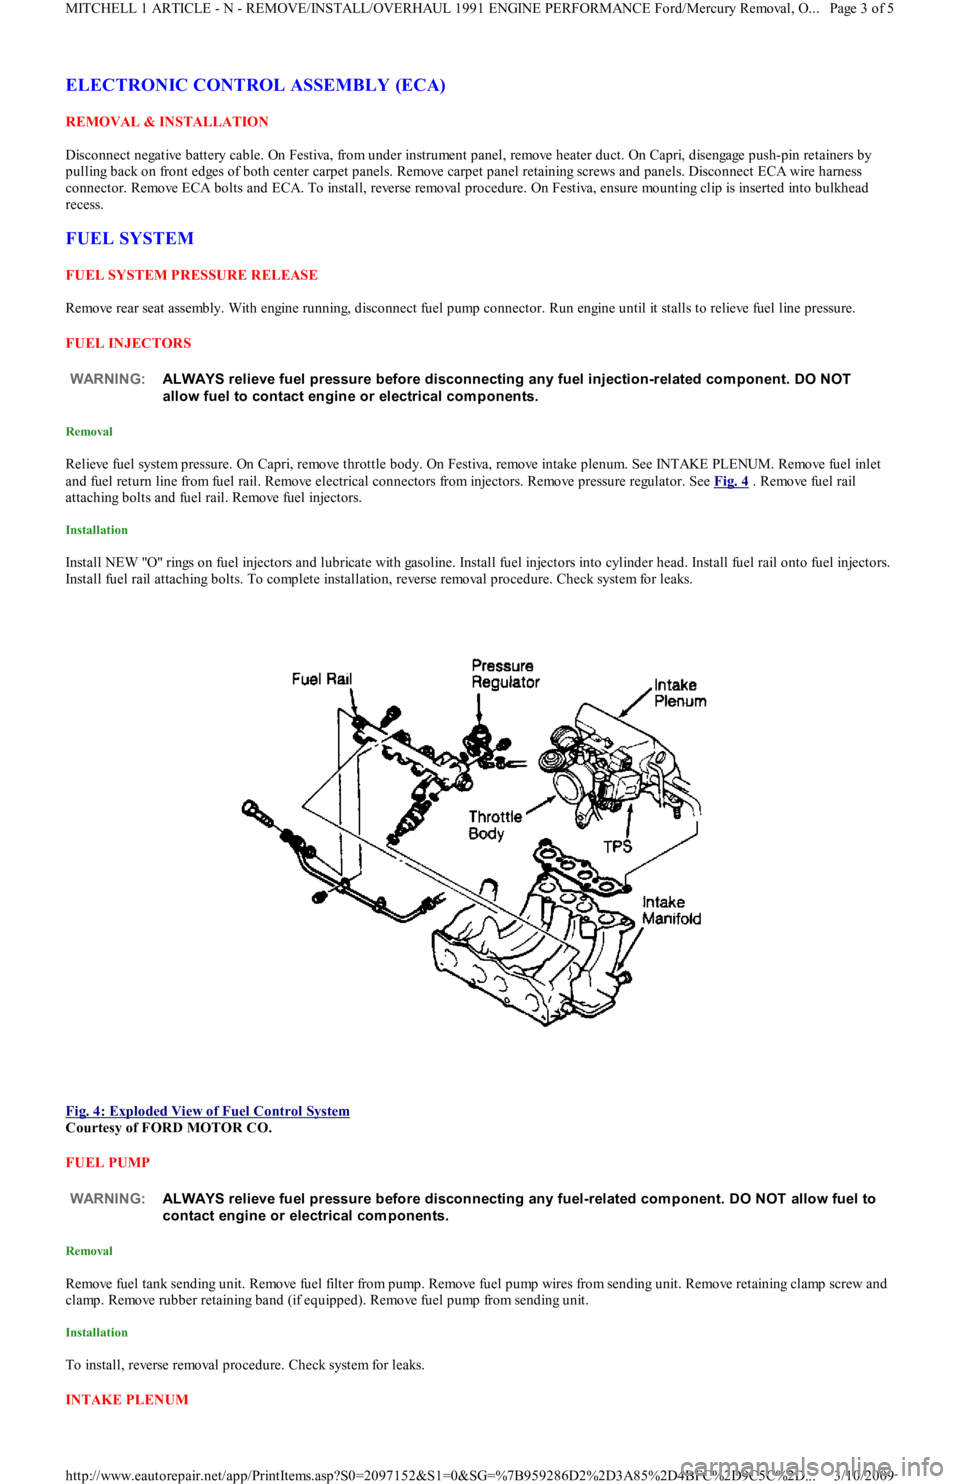 FORD FESTIVA 1991  Service Manual ELECTRONIC CONTROL ASSEMBLY (ECA)
REMOVAL & INSTALLATION 
Disconnect negative battery cable. On Festiva, from under instrument panel, remove heater duct. On Capri, disengage push-pin retainers by 
pul